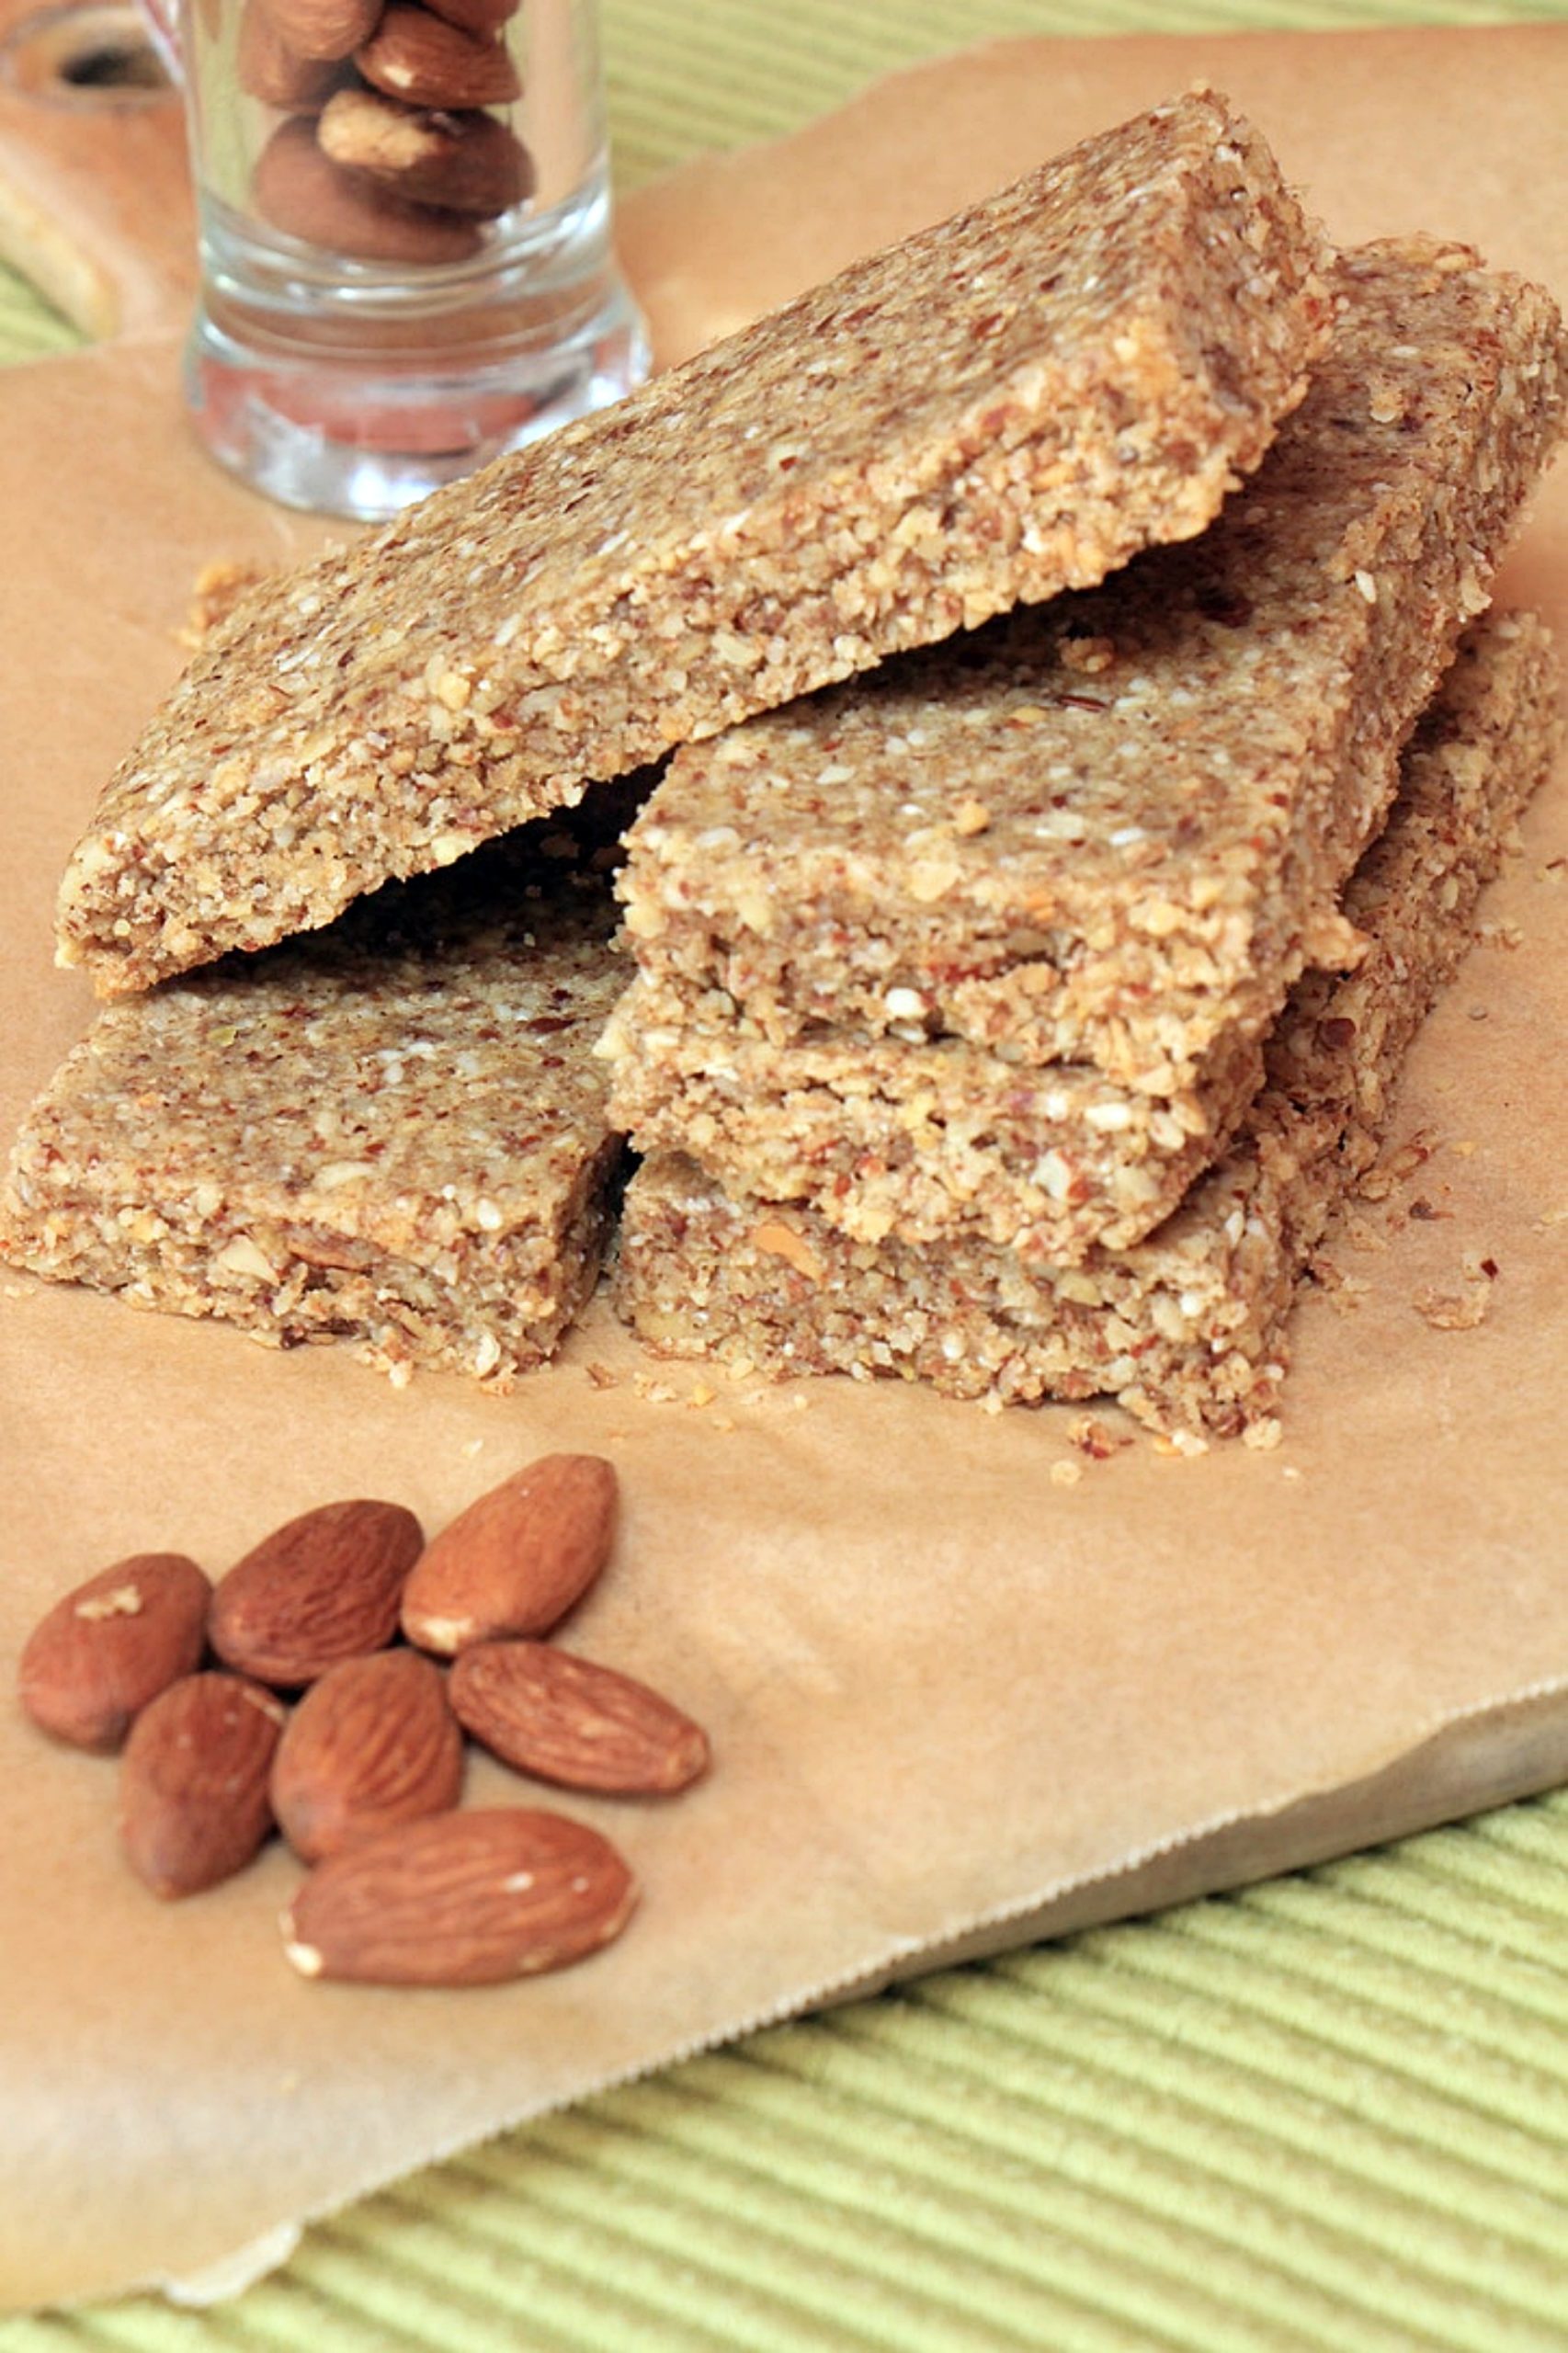 Oat and nut bars